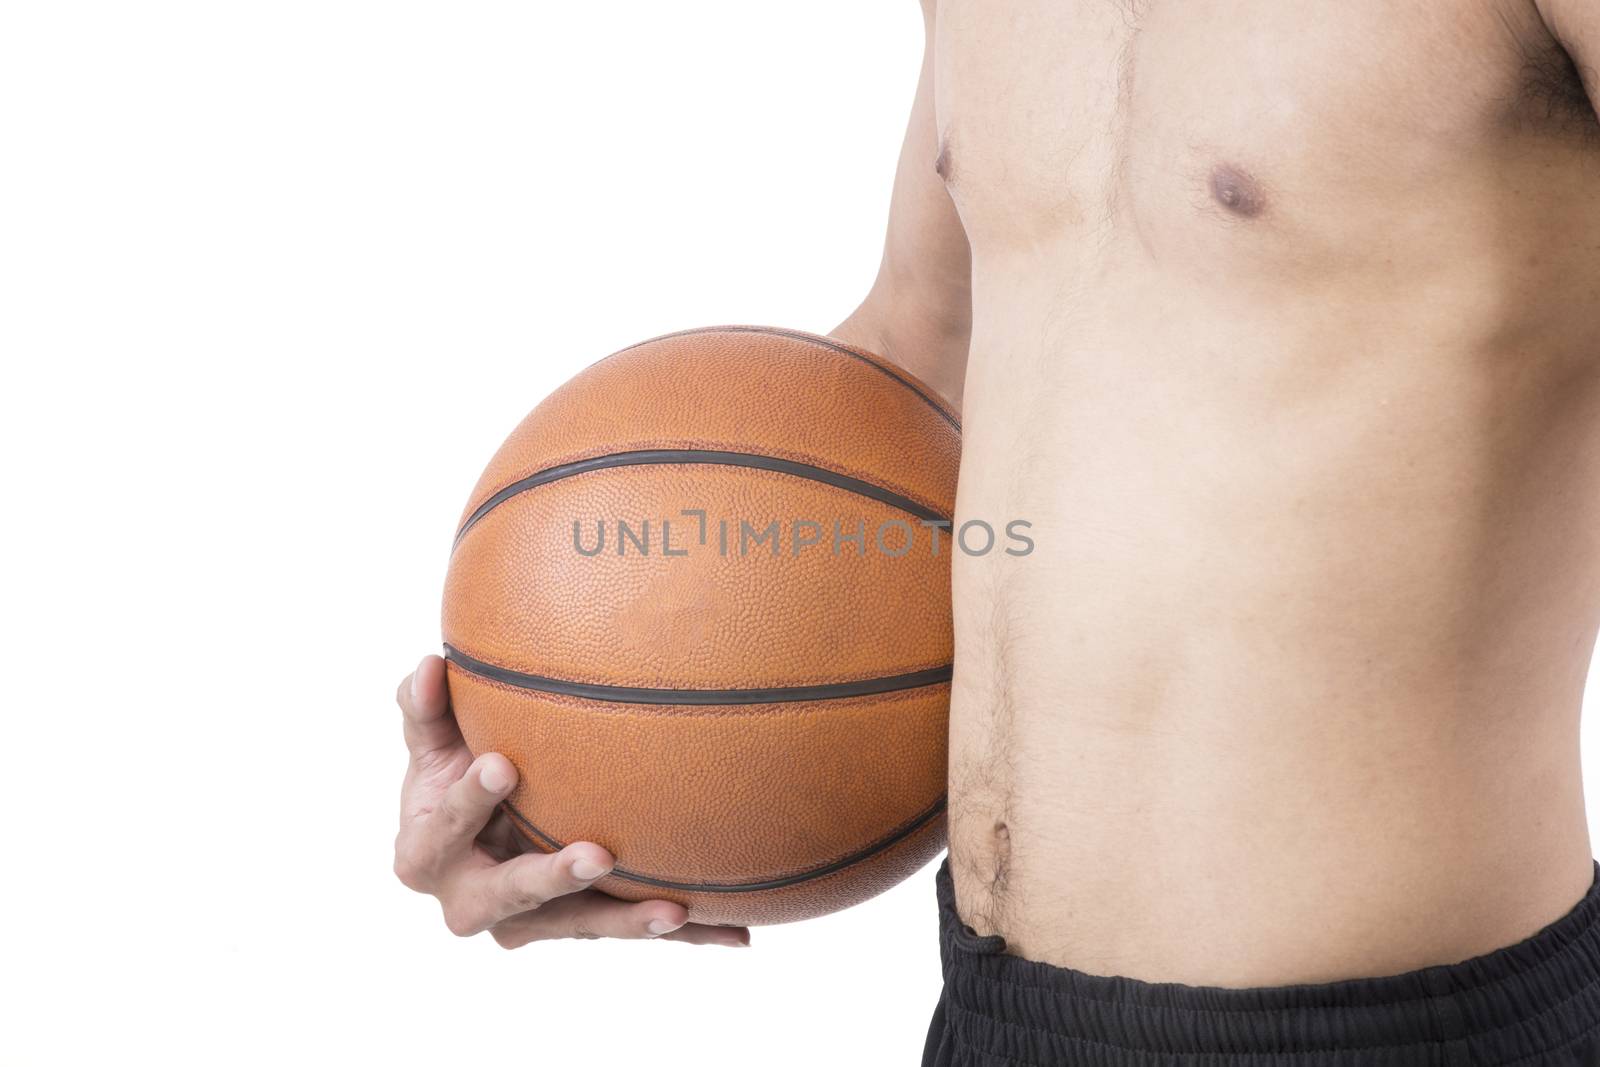 Asian body man with basketball on white background